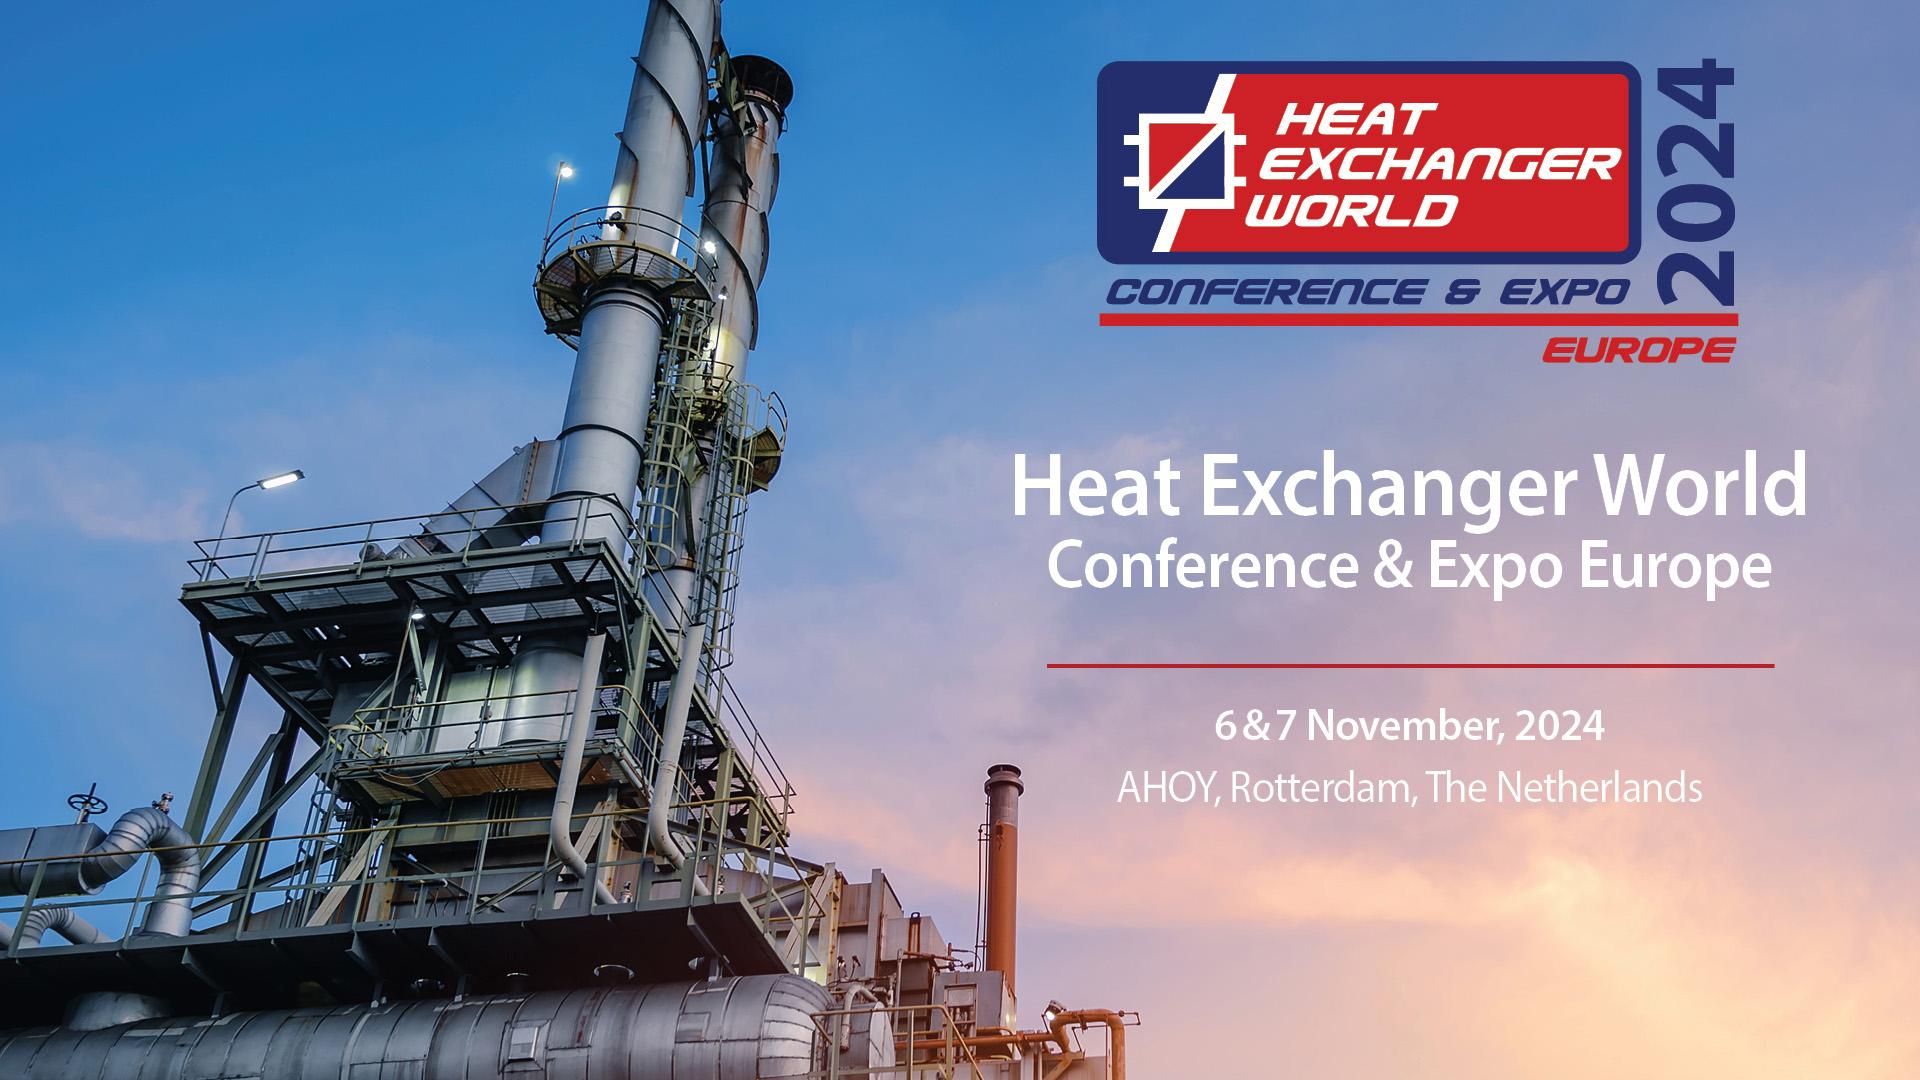 Heat Exchanger World Conference & Expo Europe 2024